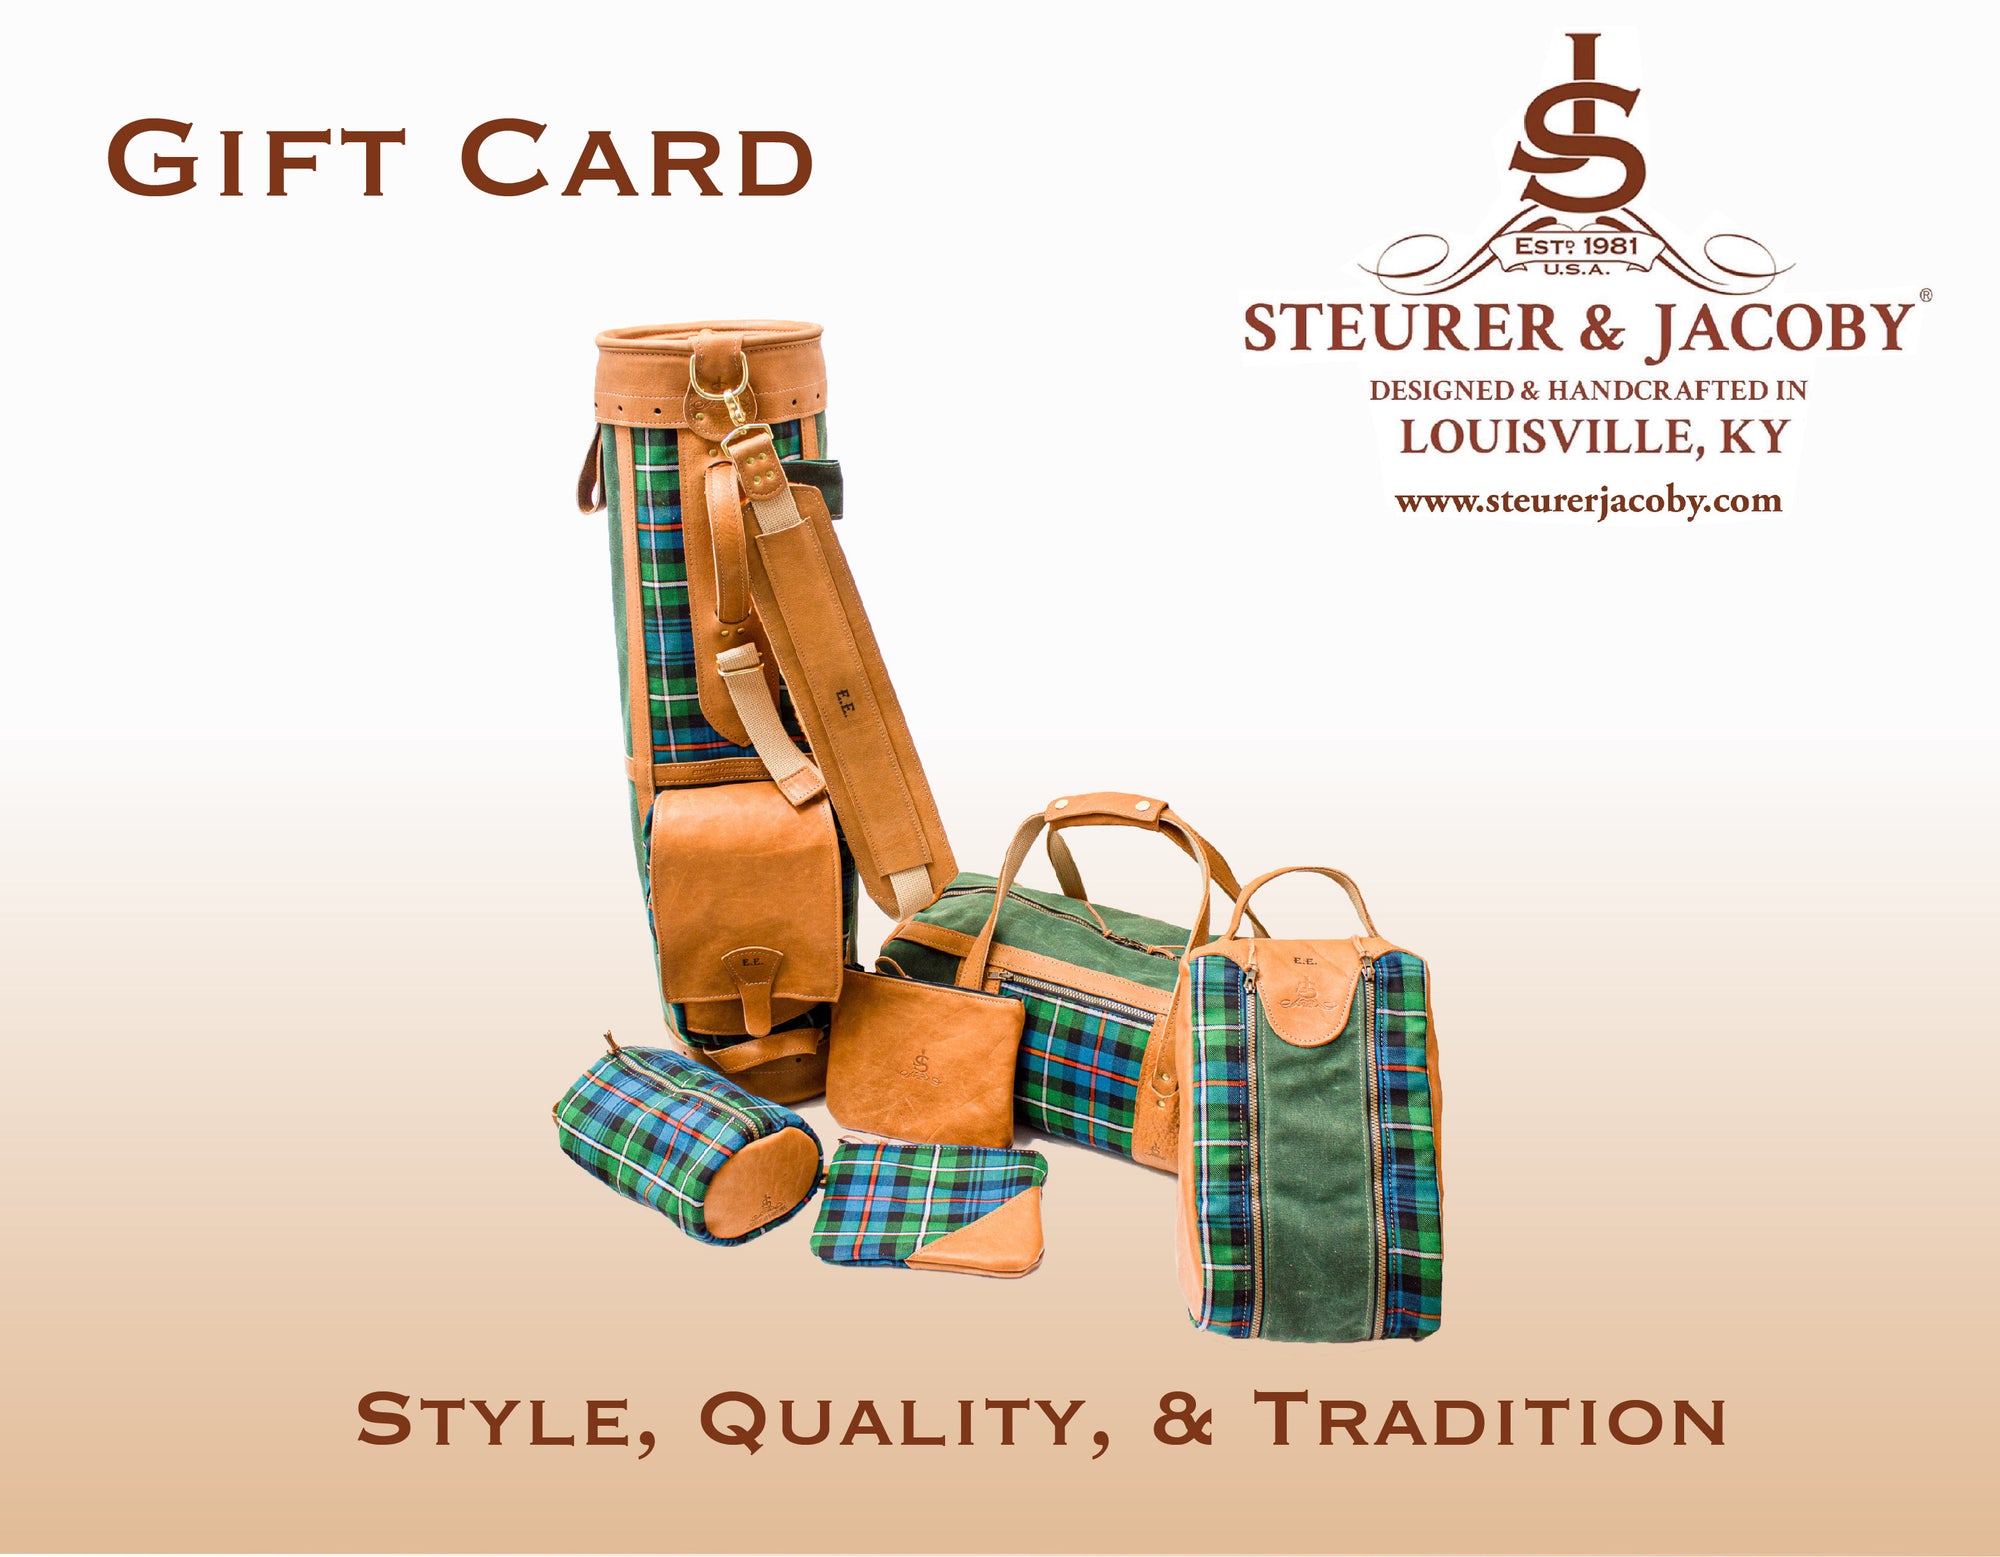 Steurer & Jacoby Gift Card - Steurer & Jacoby